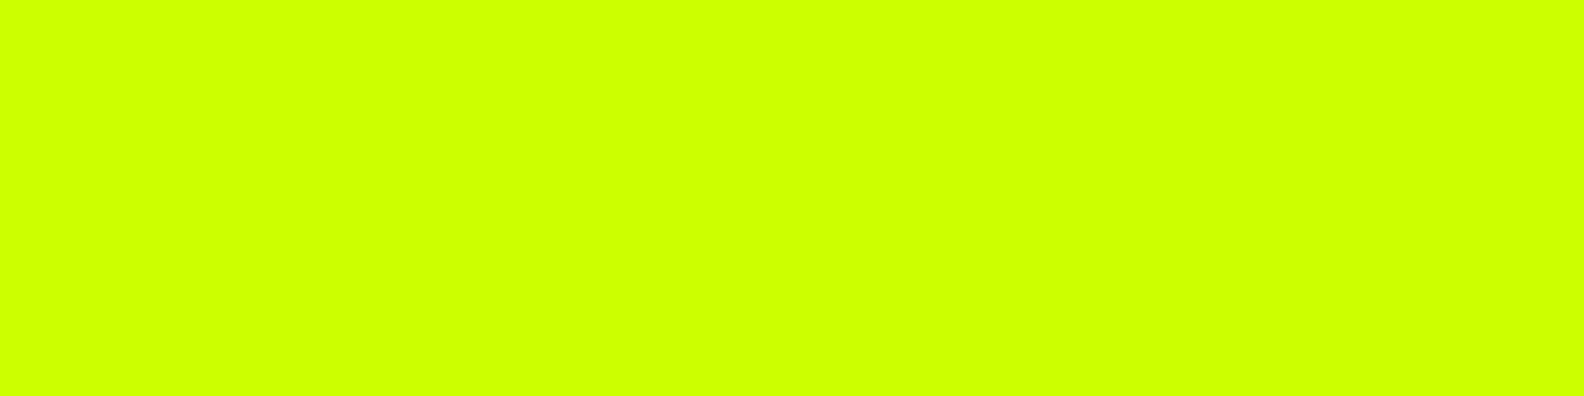 1584x396 Electric Lime Solid Color Background